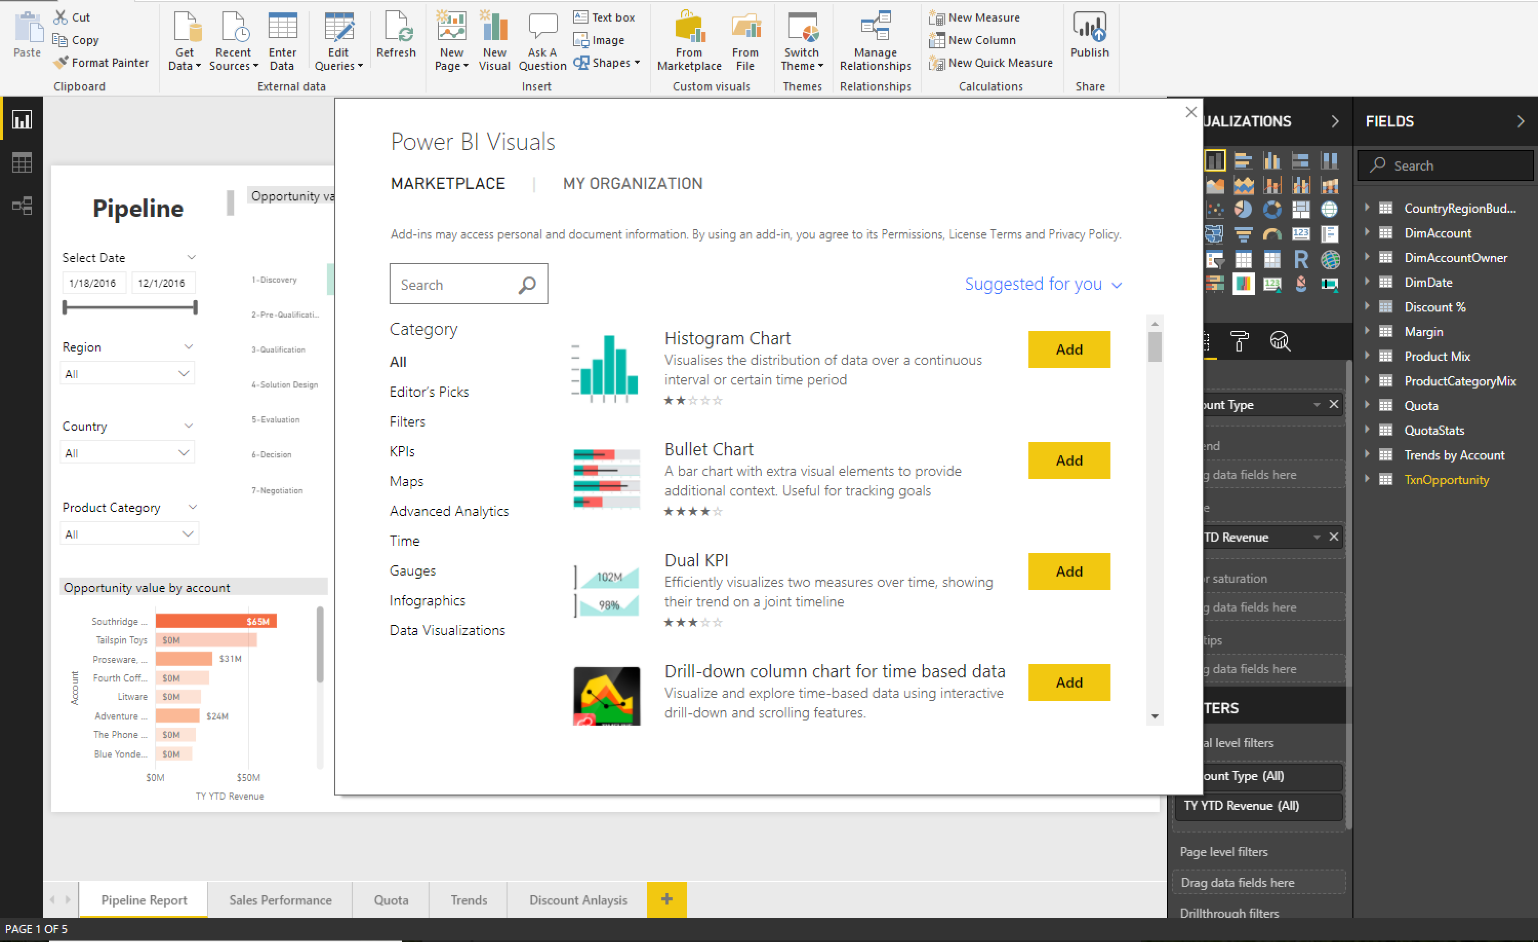 A screenshot of the marketplace for Power BI Visuals